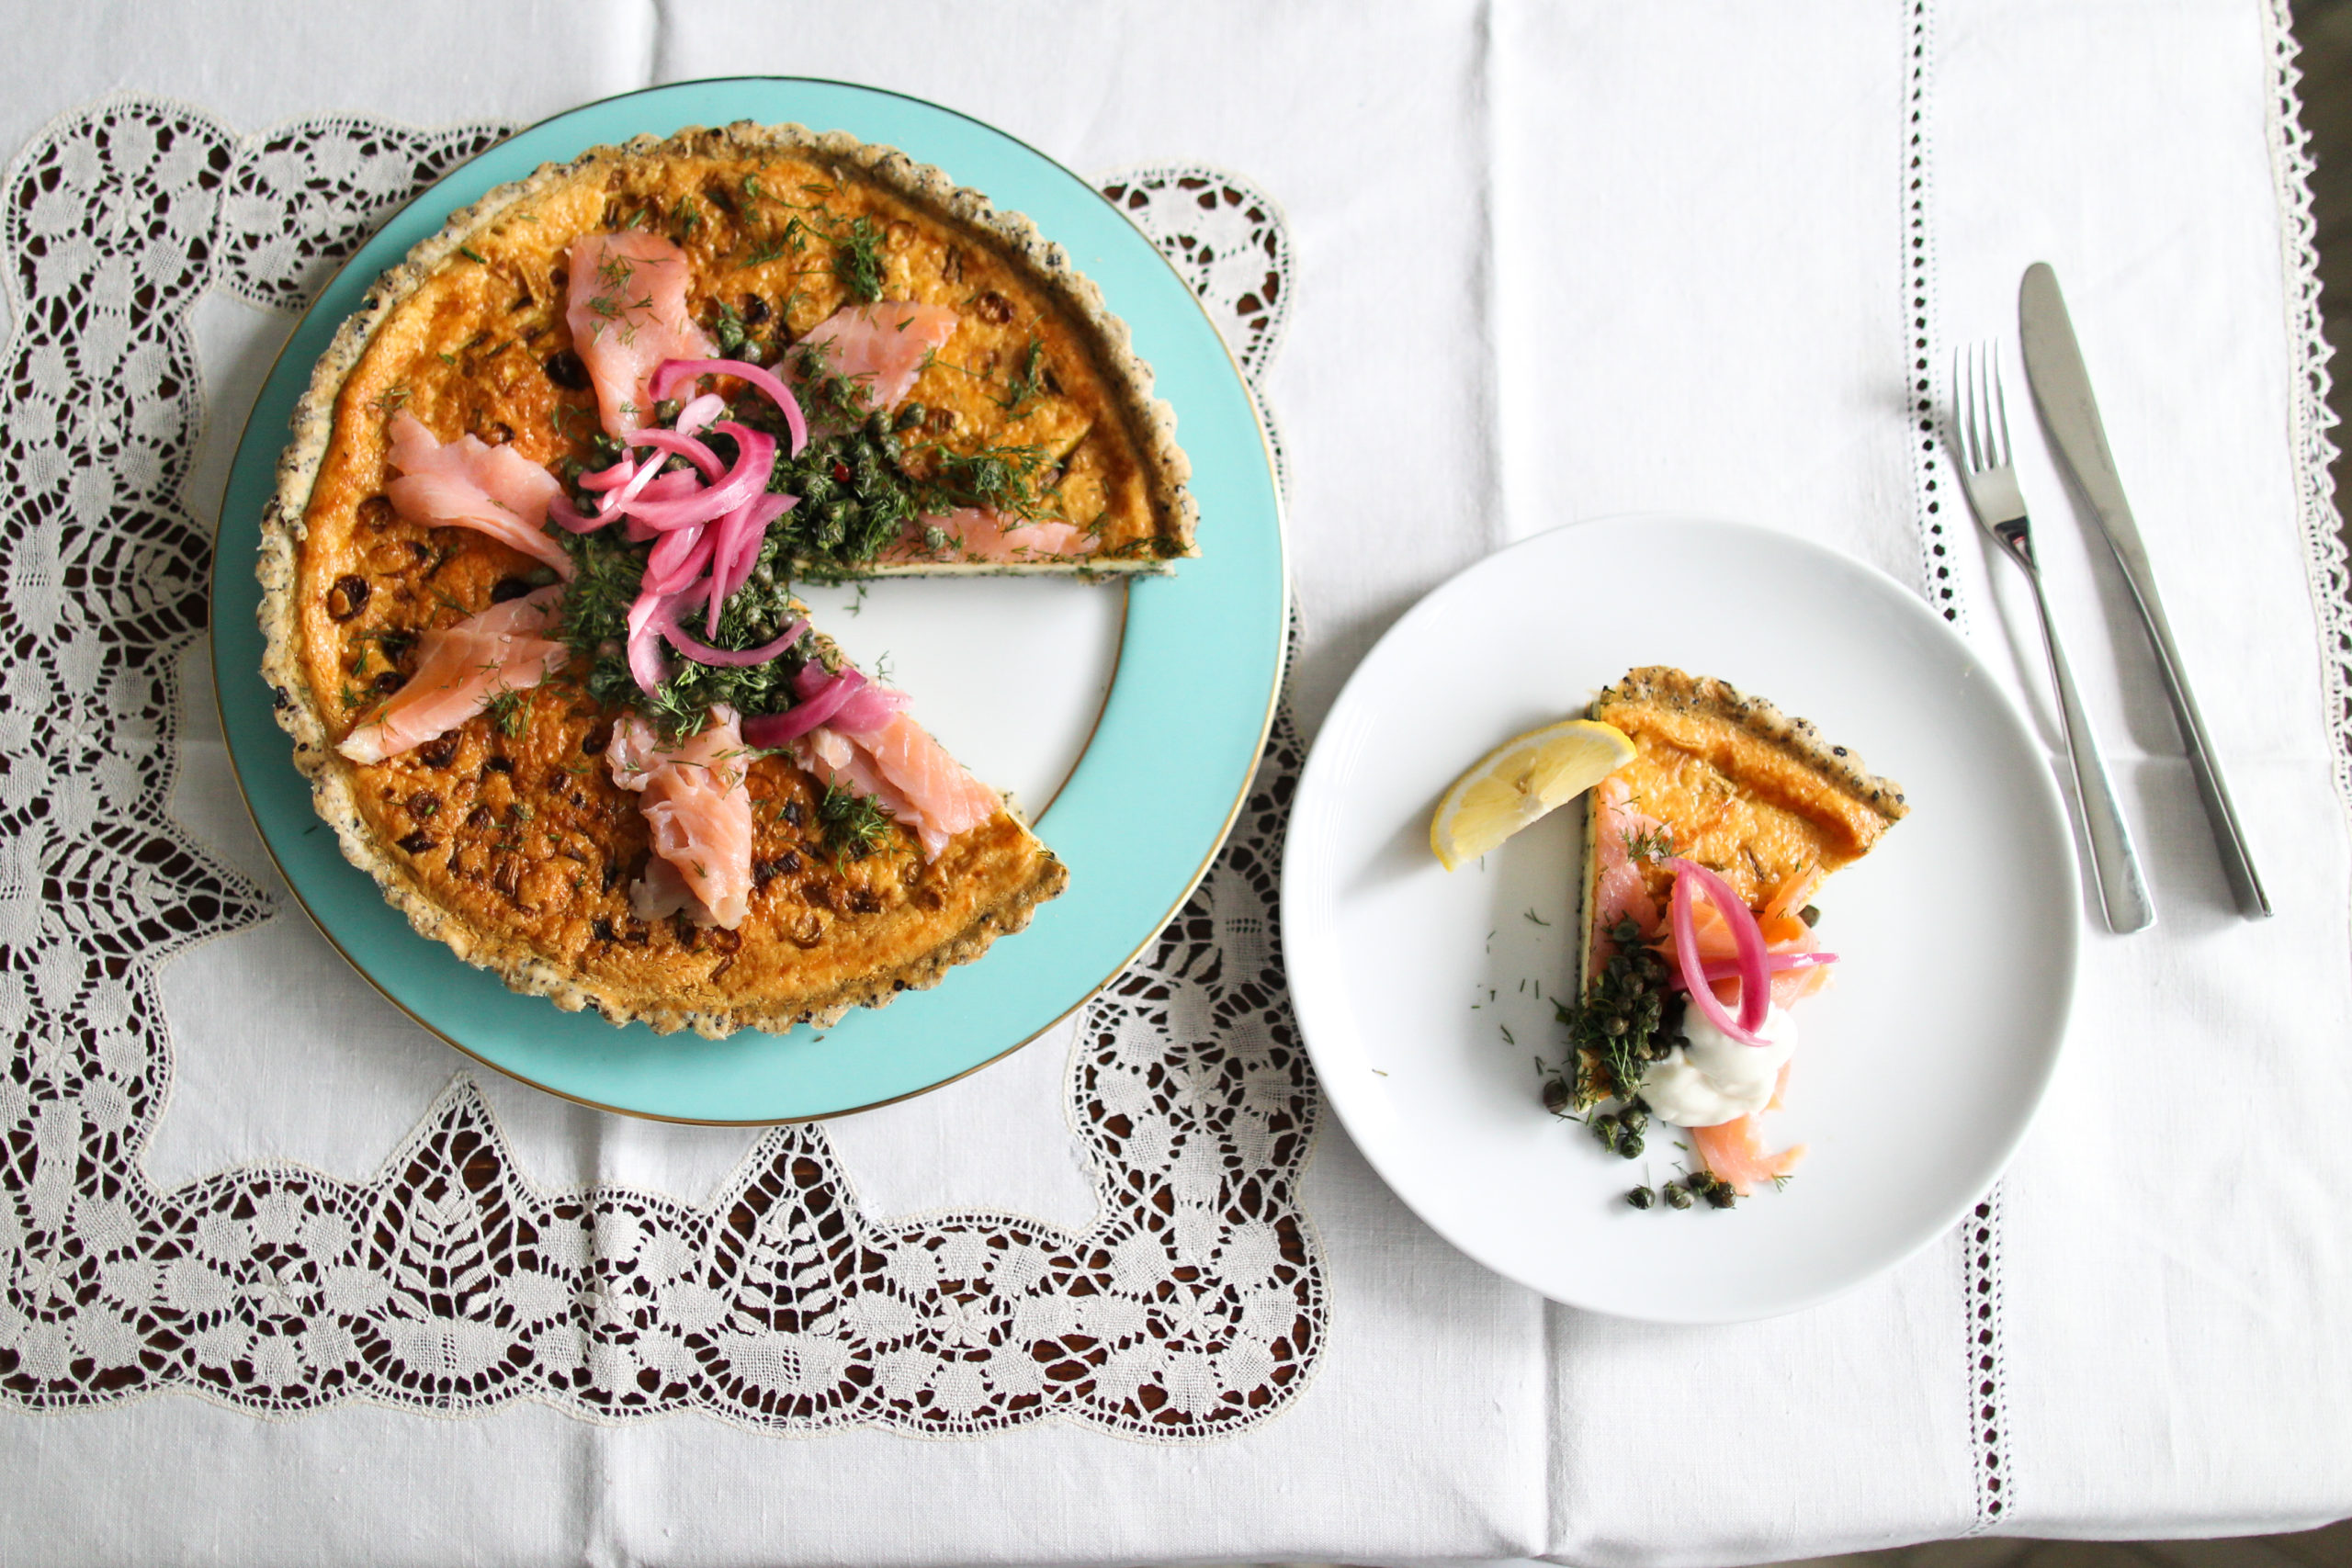 Spring onion quiche with smoked salmon